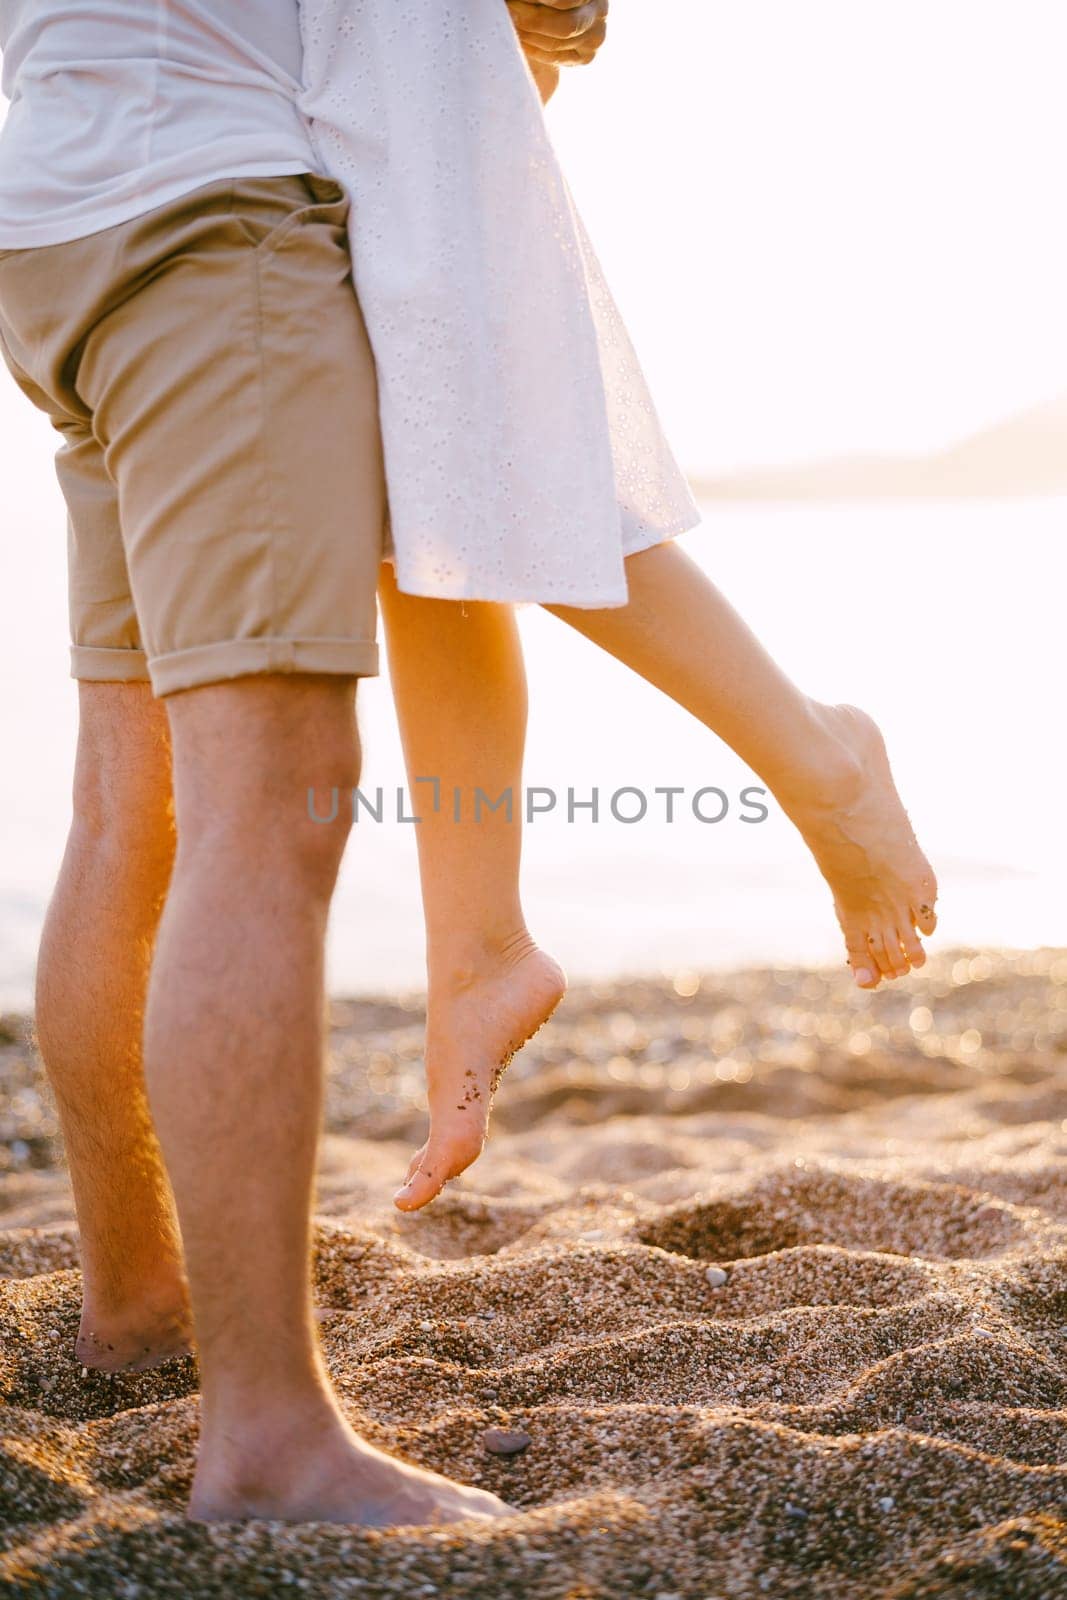 Man lifted up a woman dangling her bare feet while standing on the beach. Cropped. Faceless by Nadtochiy